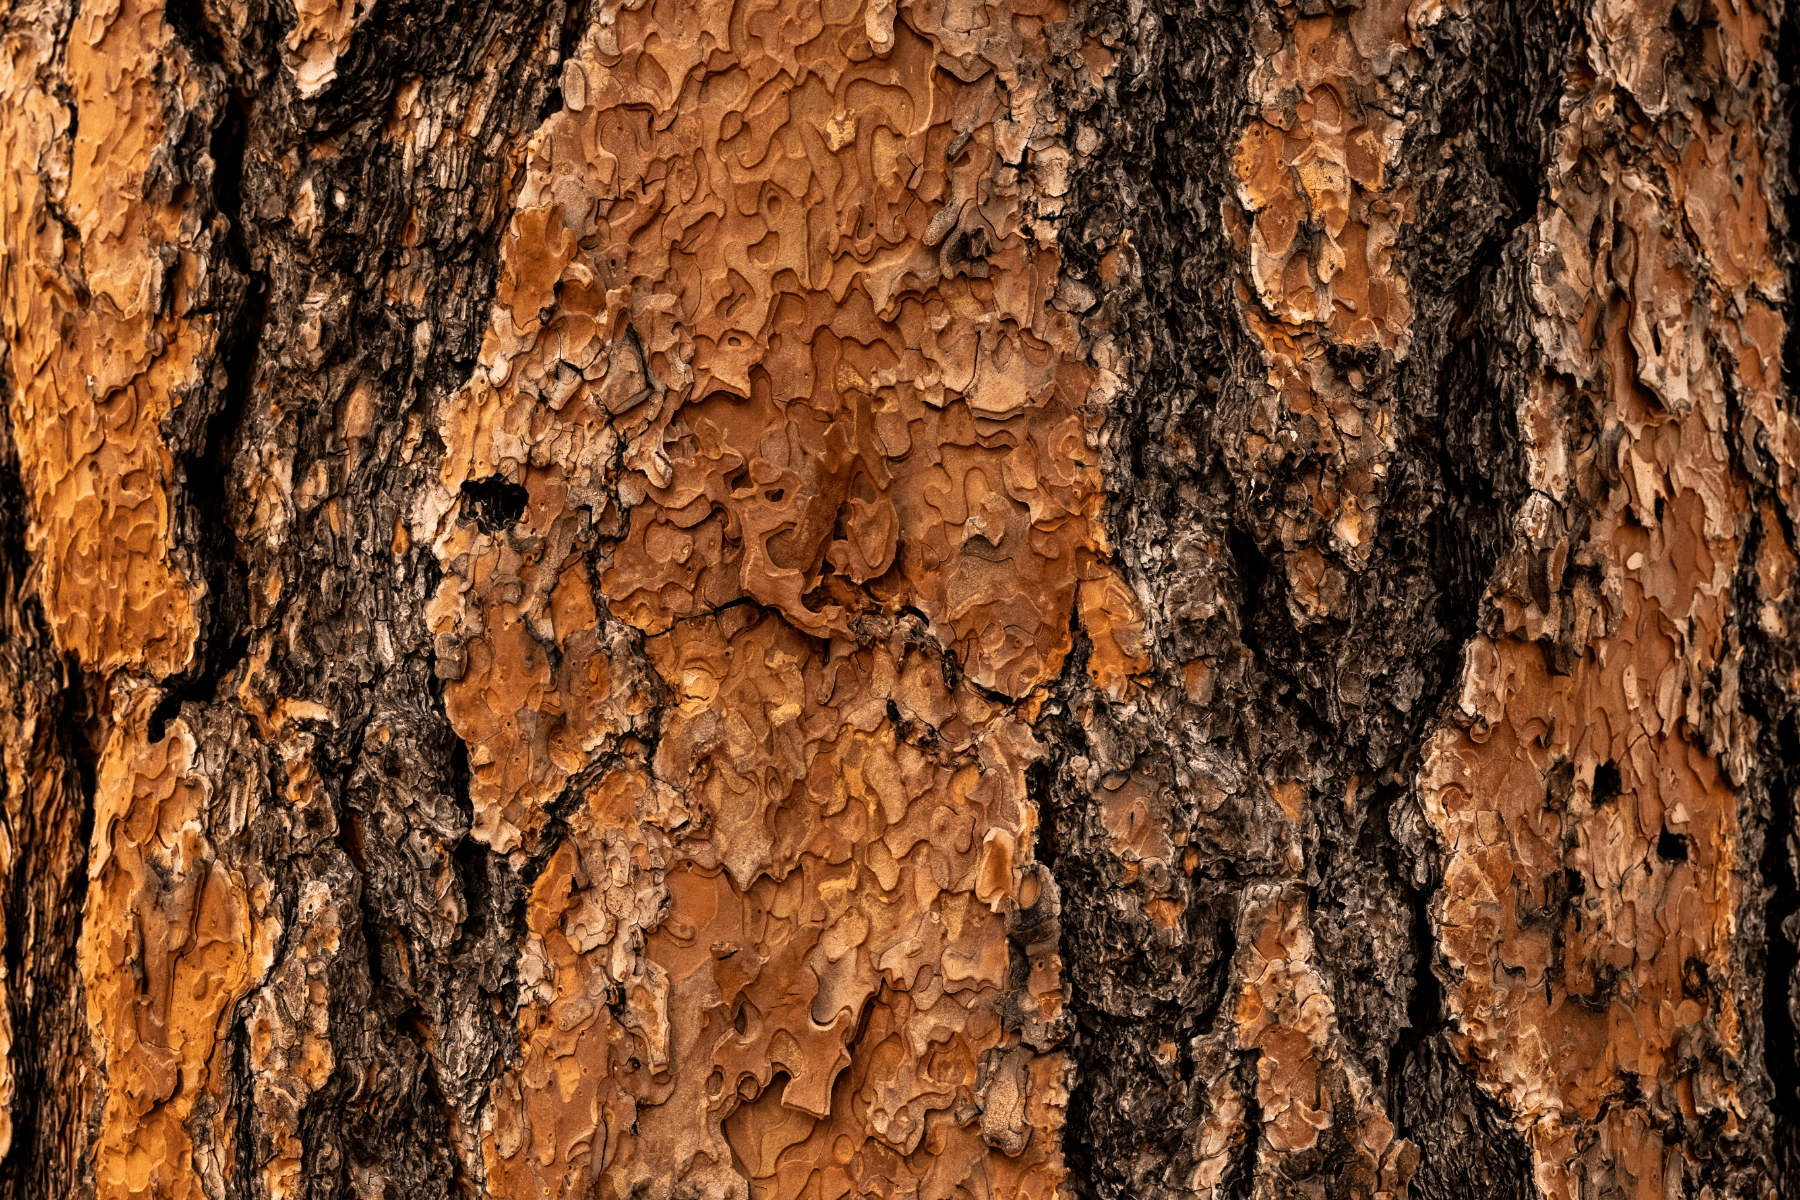 A closeup of a ponderosa pine tree with thick, scaly bark that is various shades of brown.